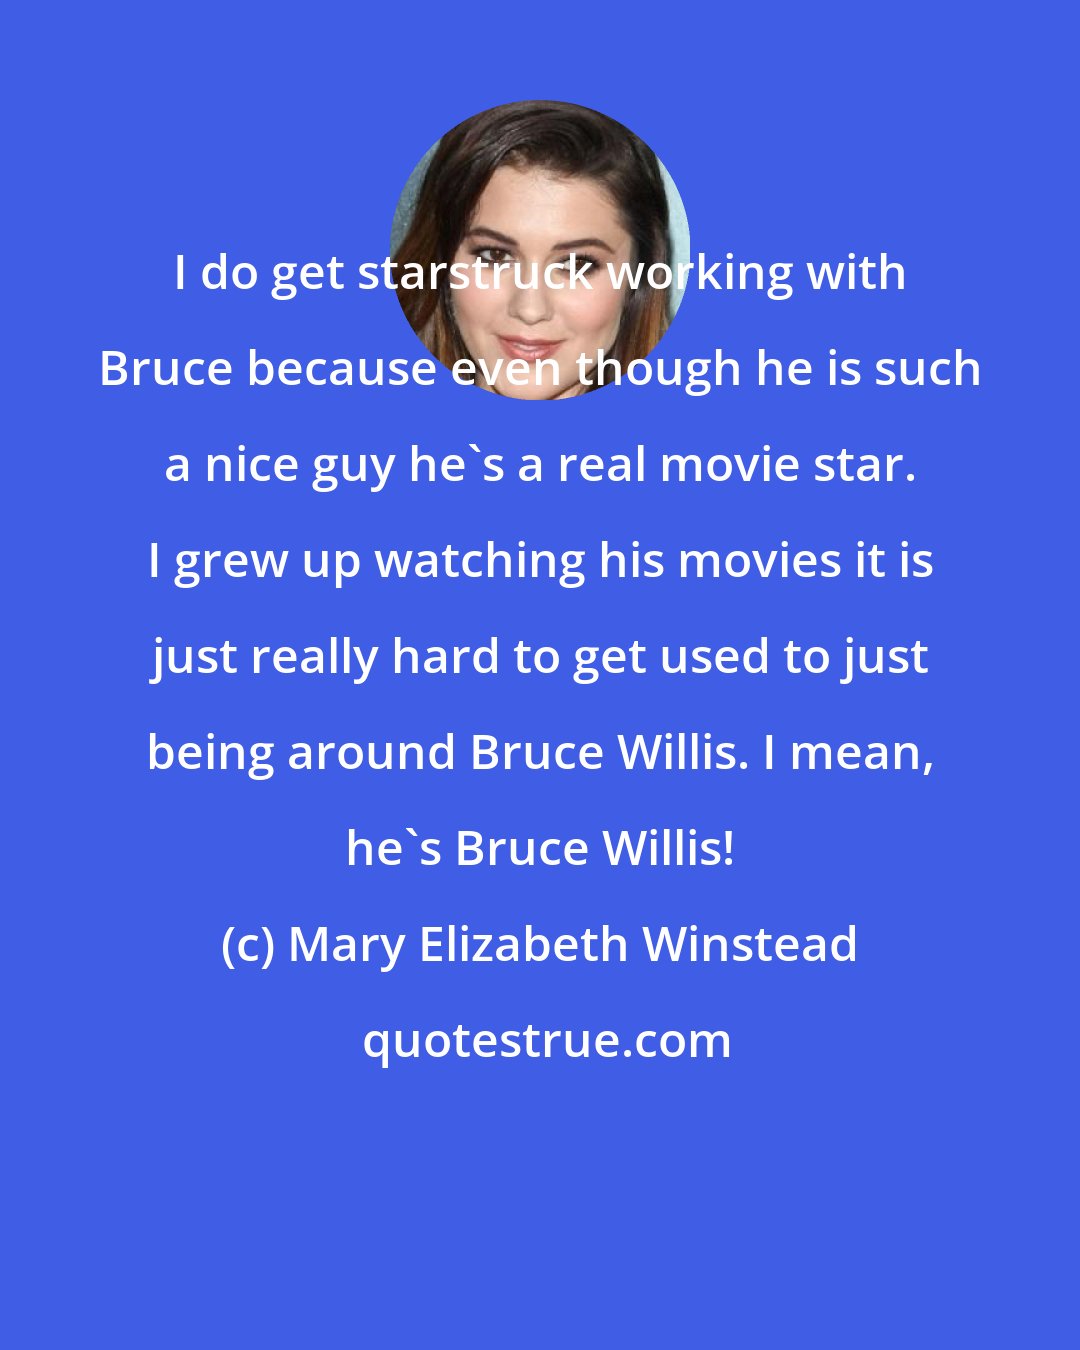 Mary Elizabeth Winstead: I do get starstruck working with Bruce because even though he is such a nice guy he's a real movie star. I grew up watching his movies it is just really hard to get used to just being around Bruce Willis. I mean, he's Bruce Willis!